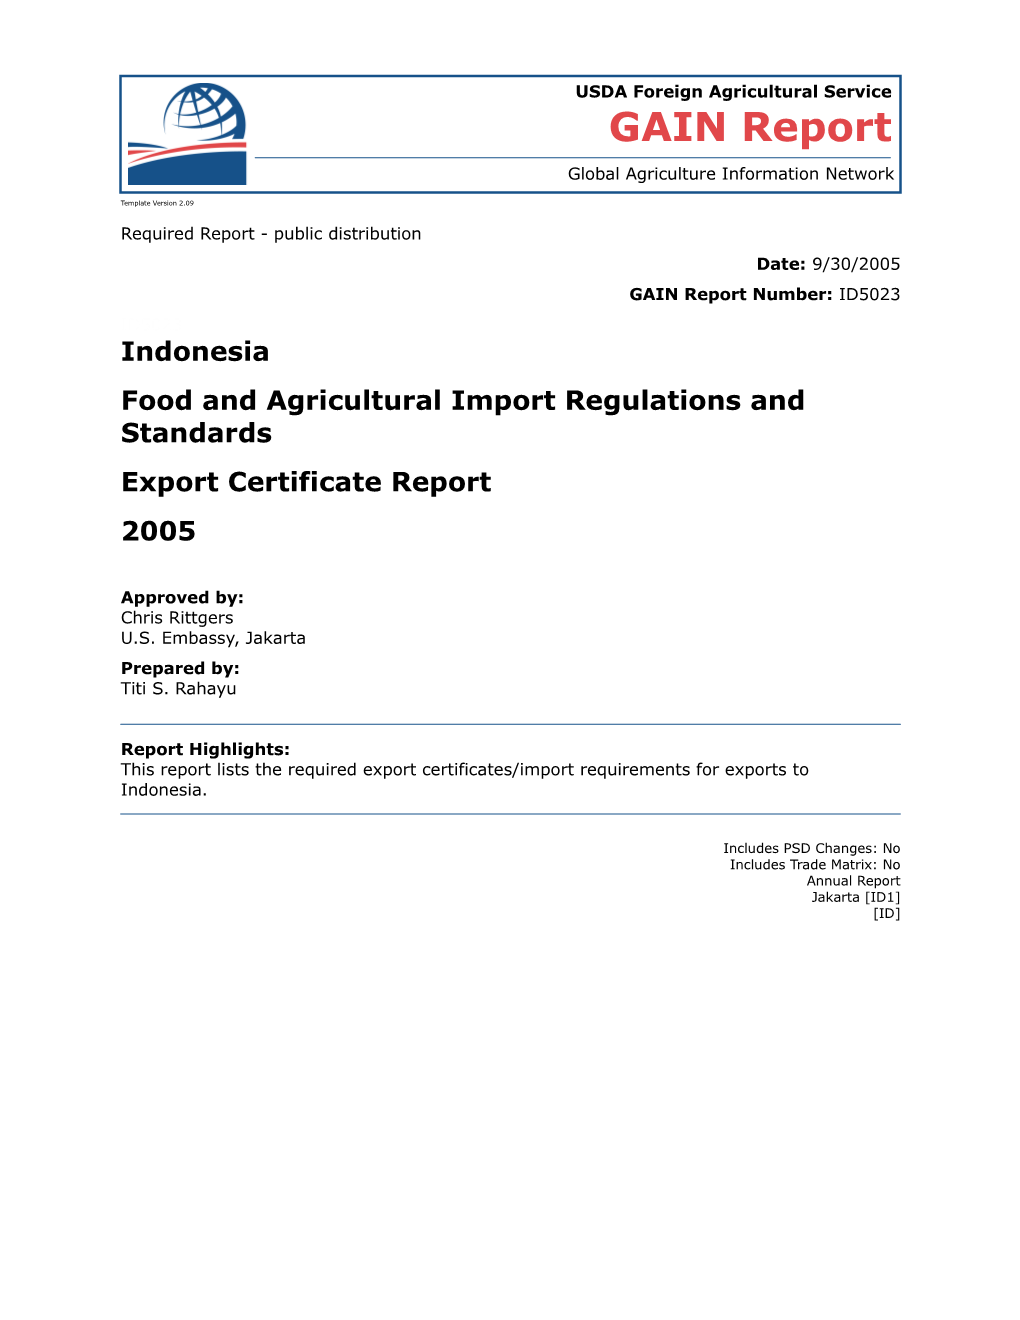 Food and Agricultural Import Regulations and Standards s3